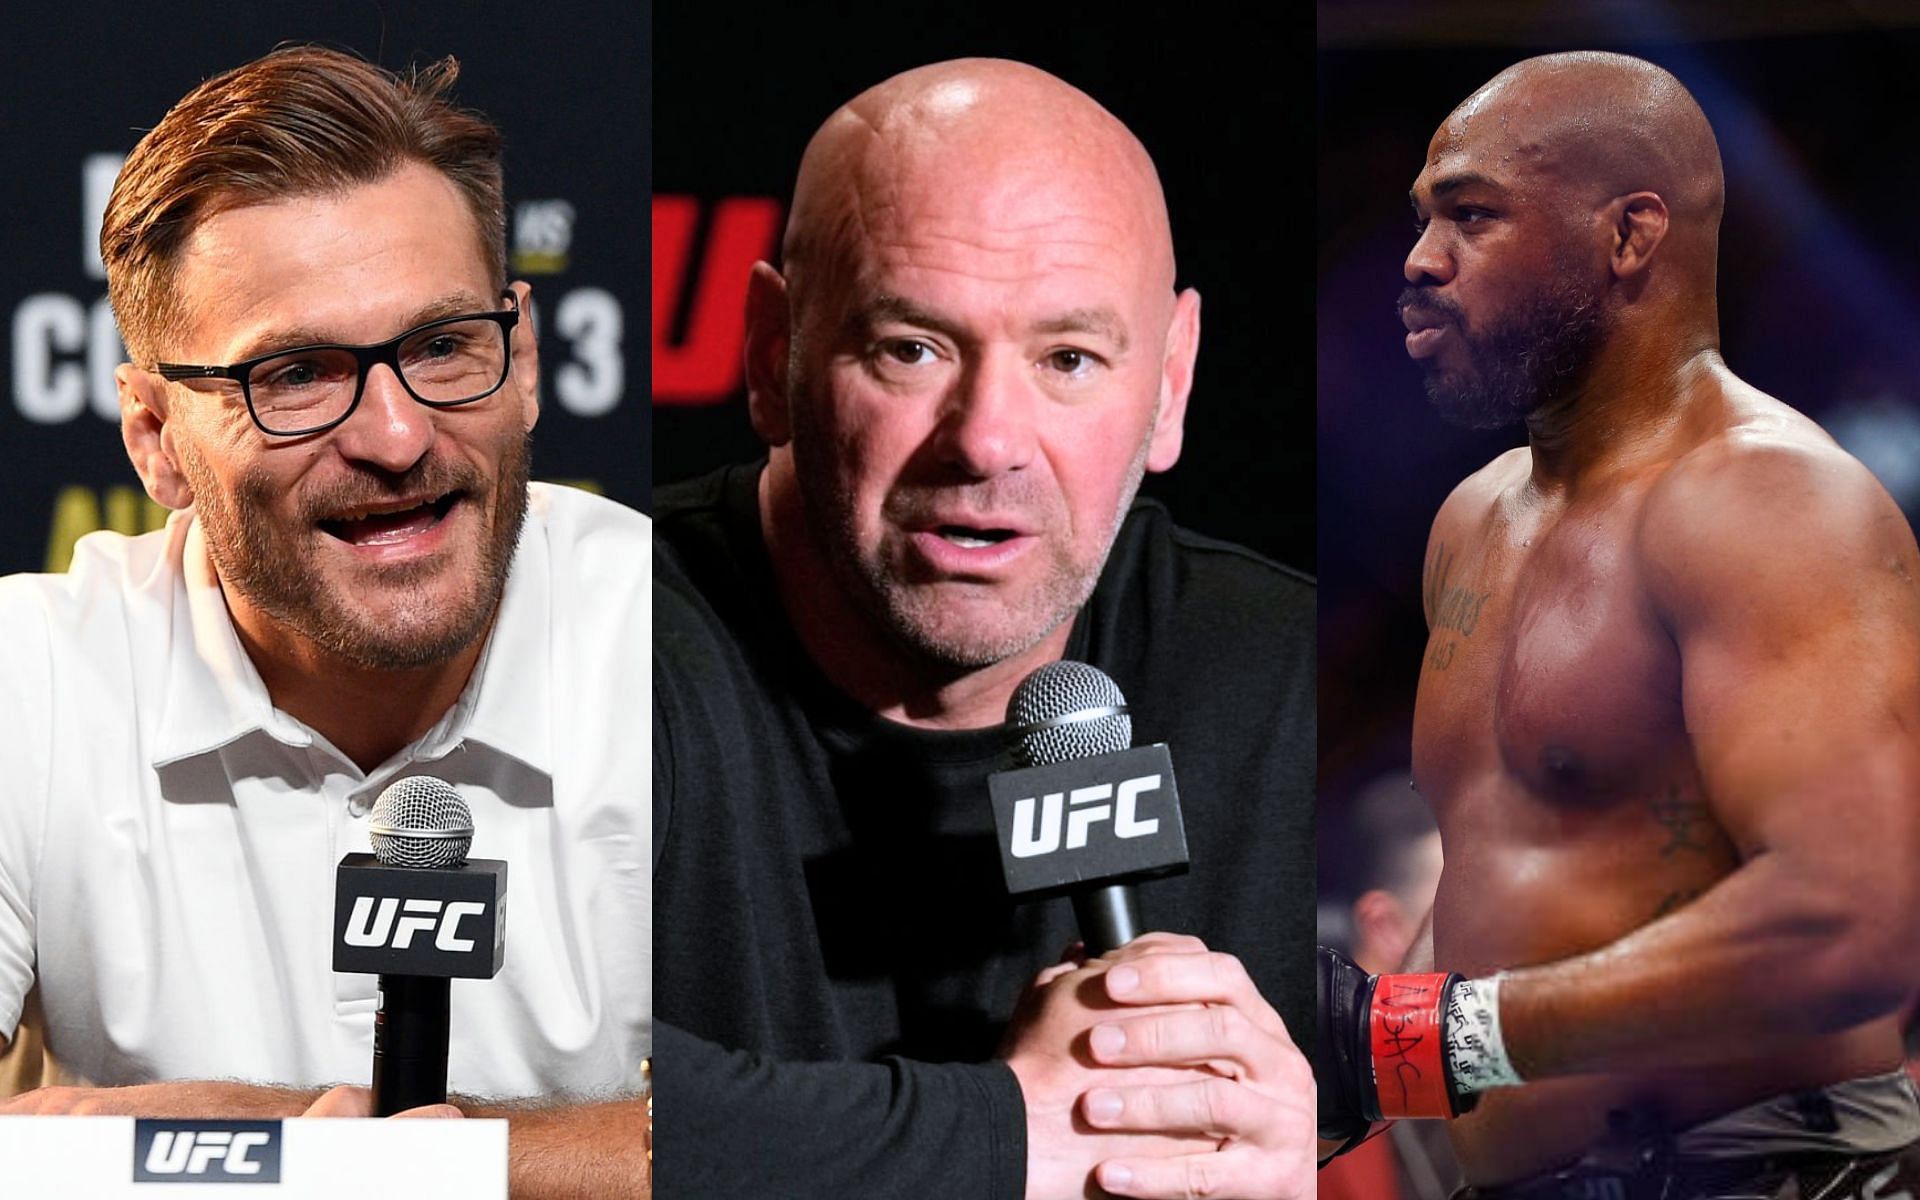 Stipe Miocic (left), Dana White (middle) and Jon Jones (right) [Images Courtesy: @GettyImages]